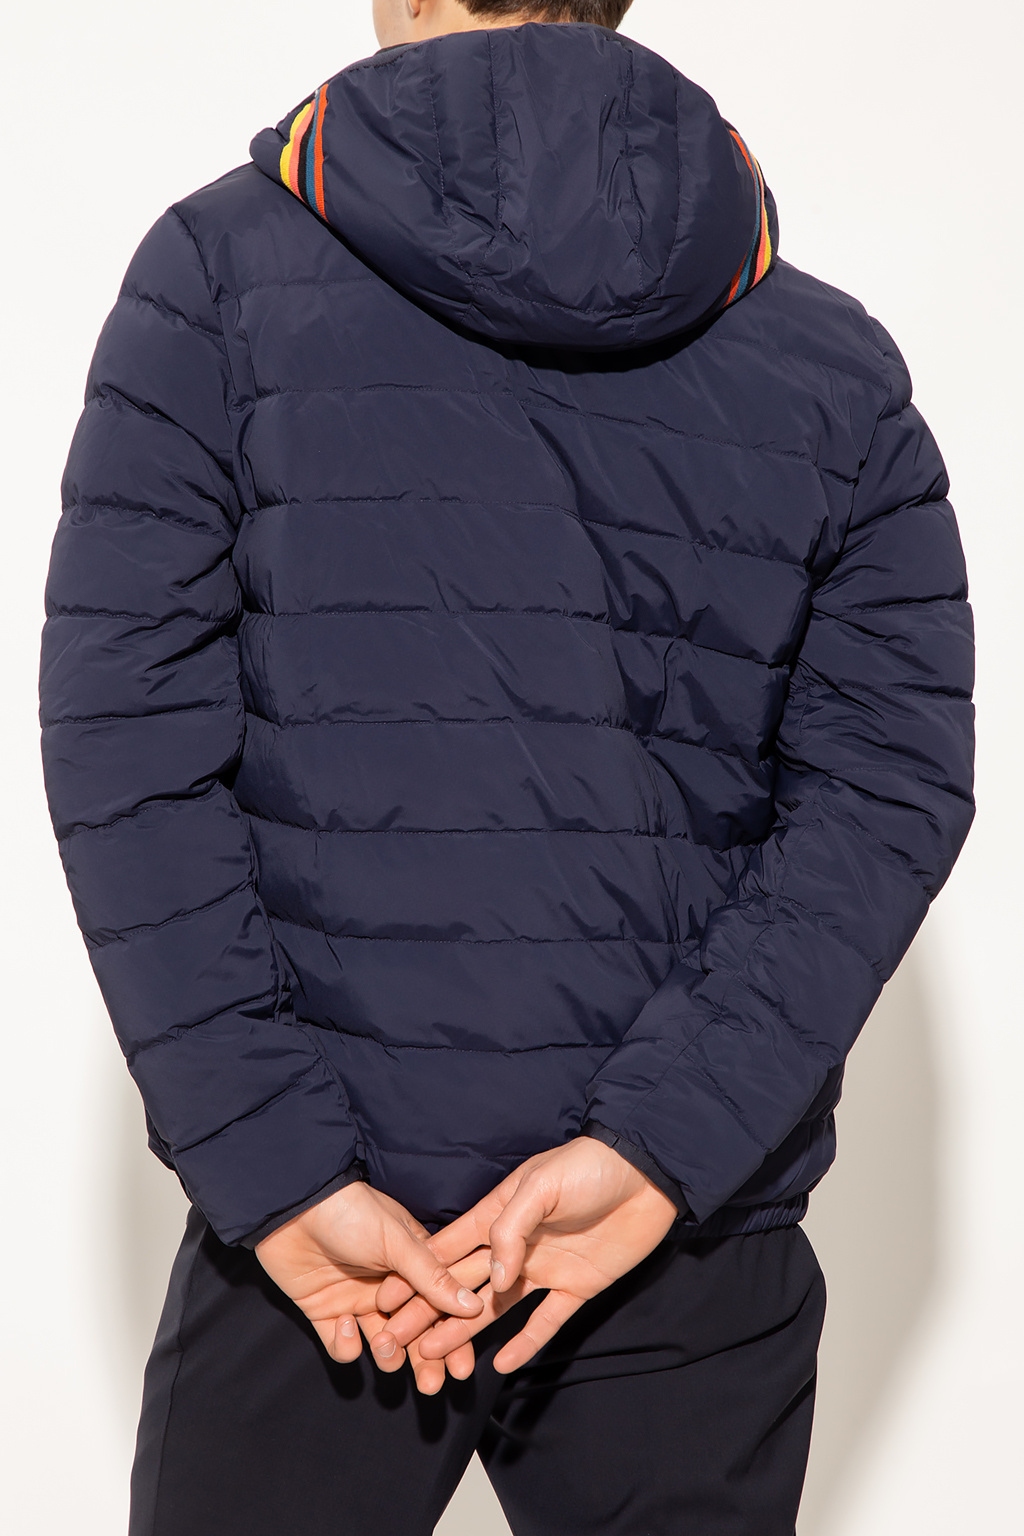 Paul Smith Hooded down Girls jacket